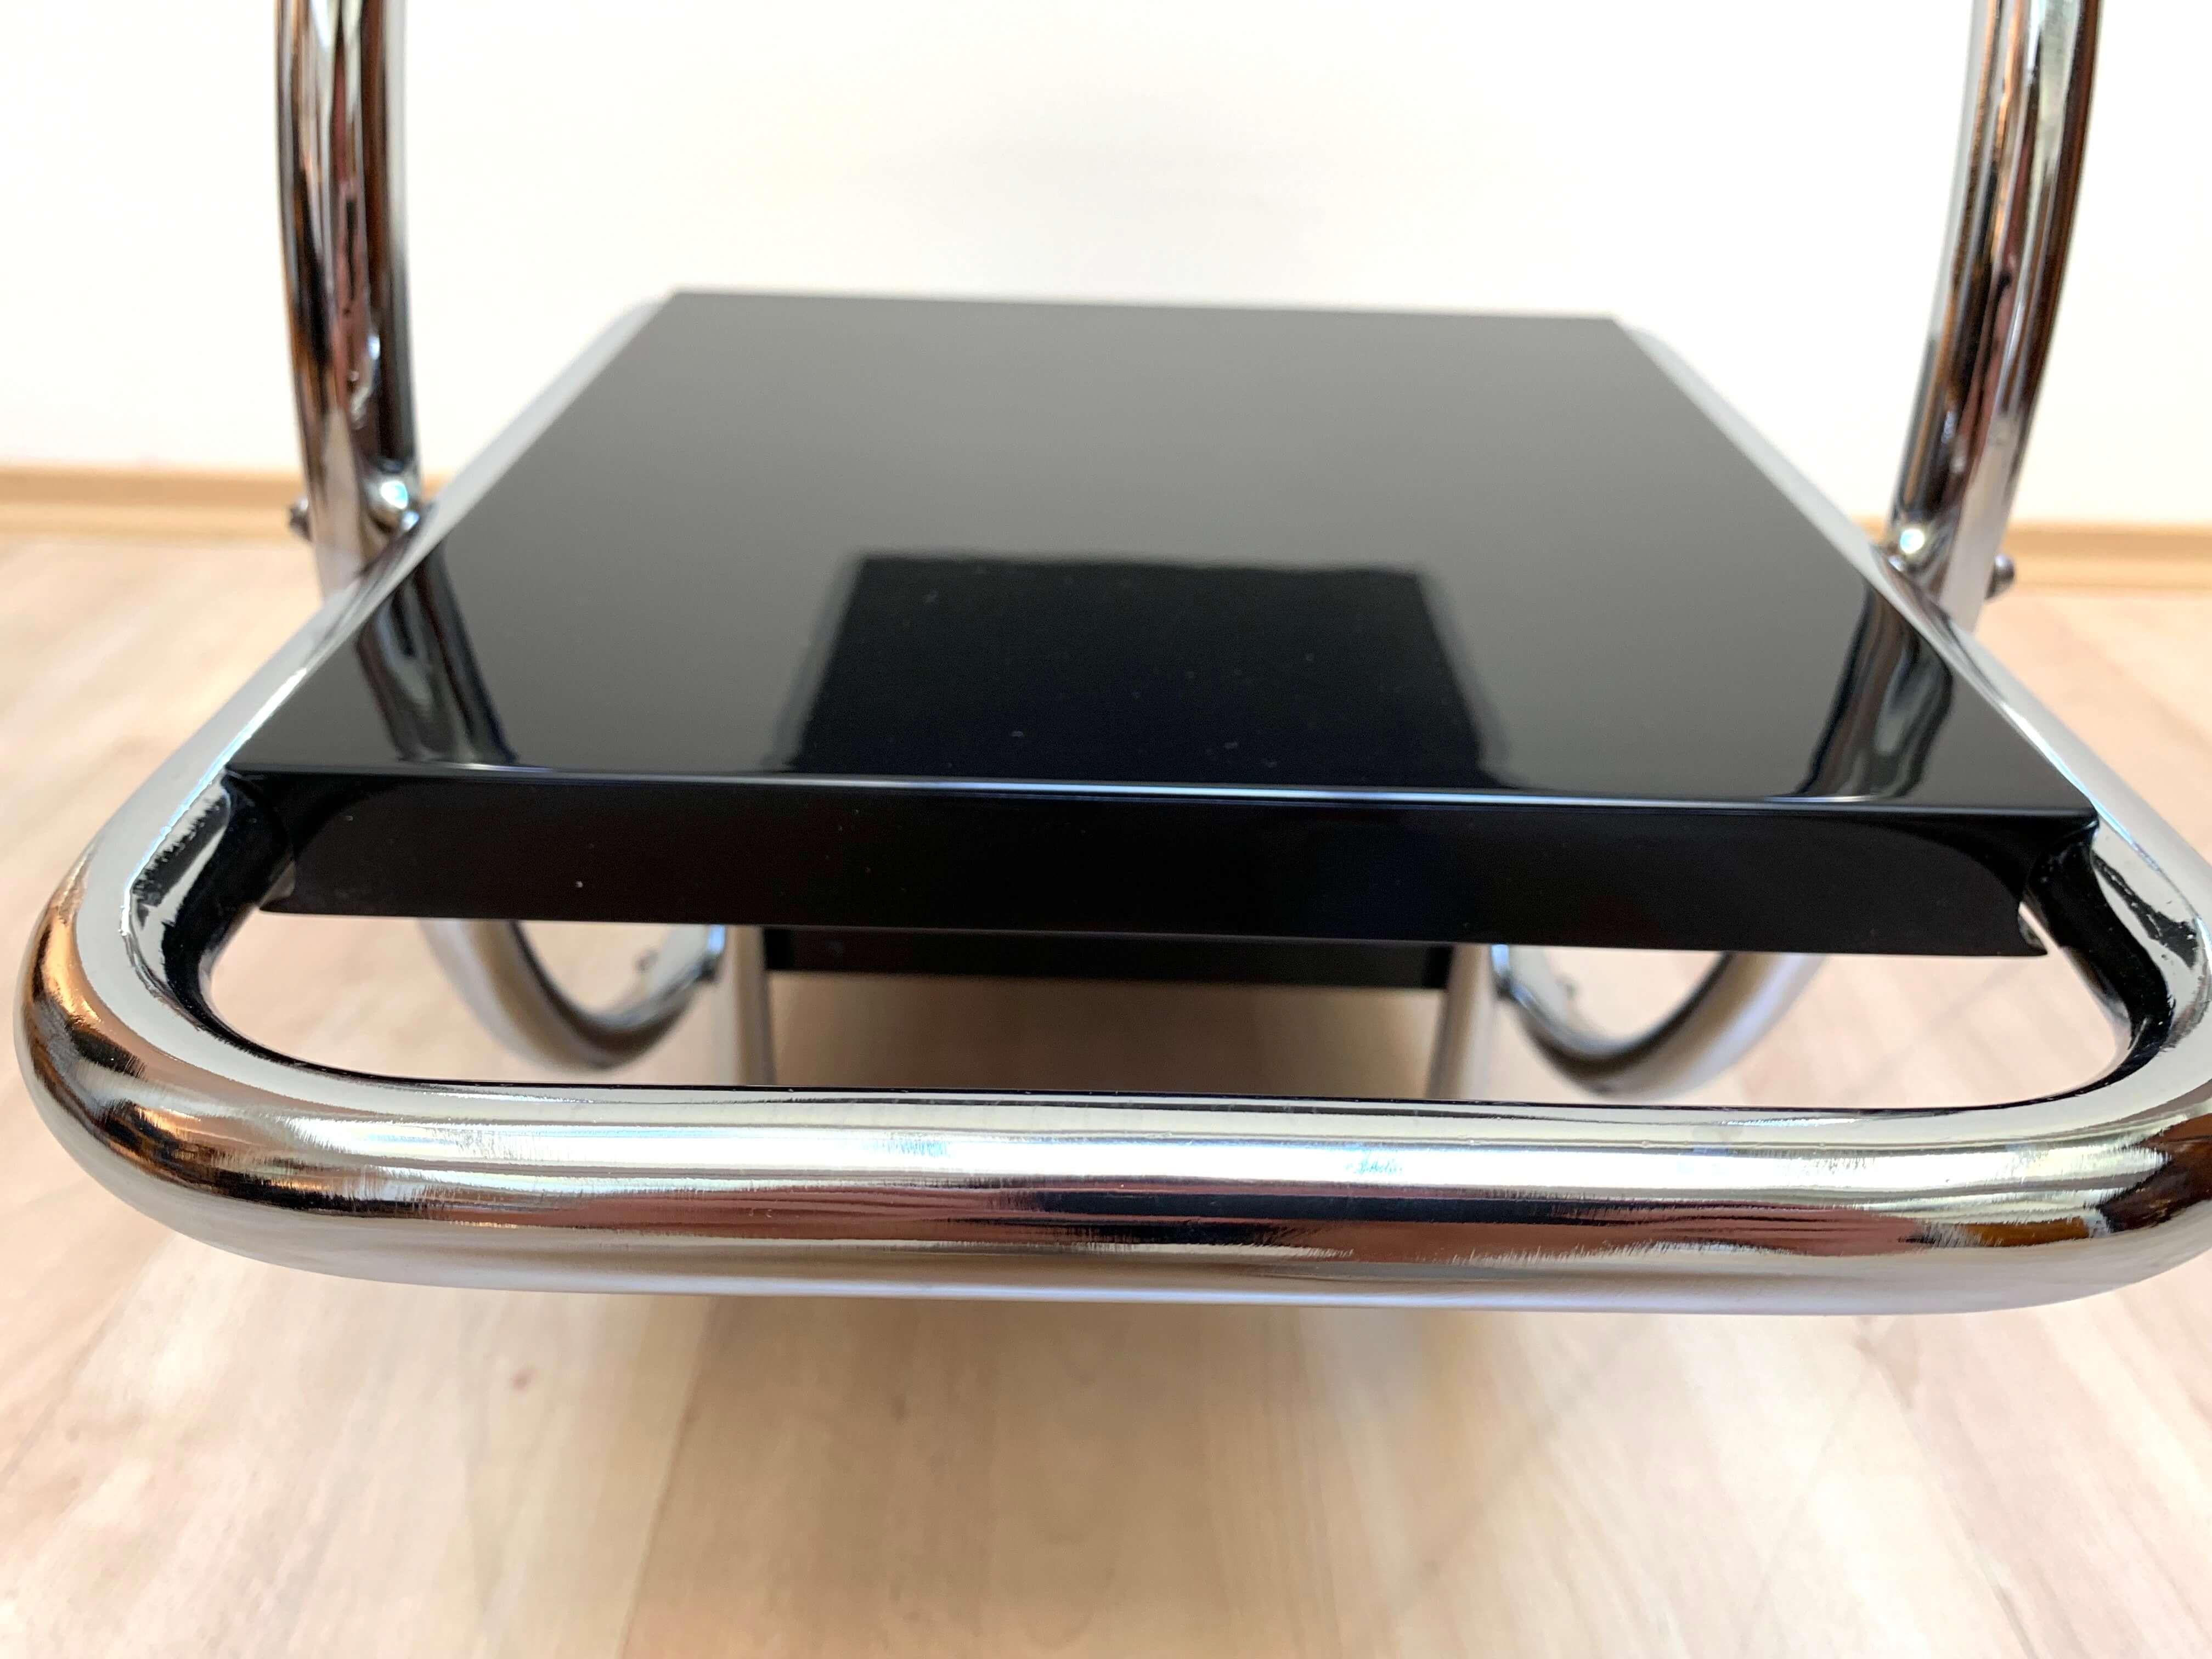 Bauhaus Steeltube Étagère, Nickel and Black Lacquer, Germany/Czechia, 1930s For Sale 3